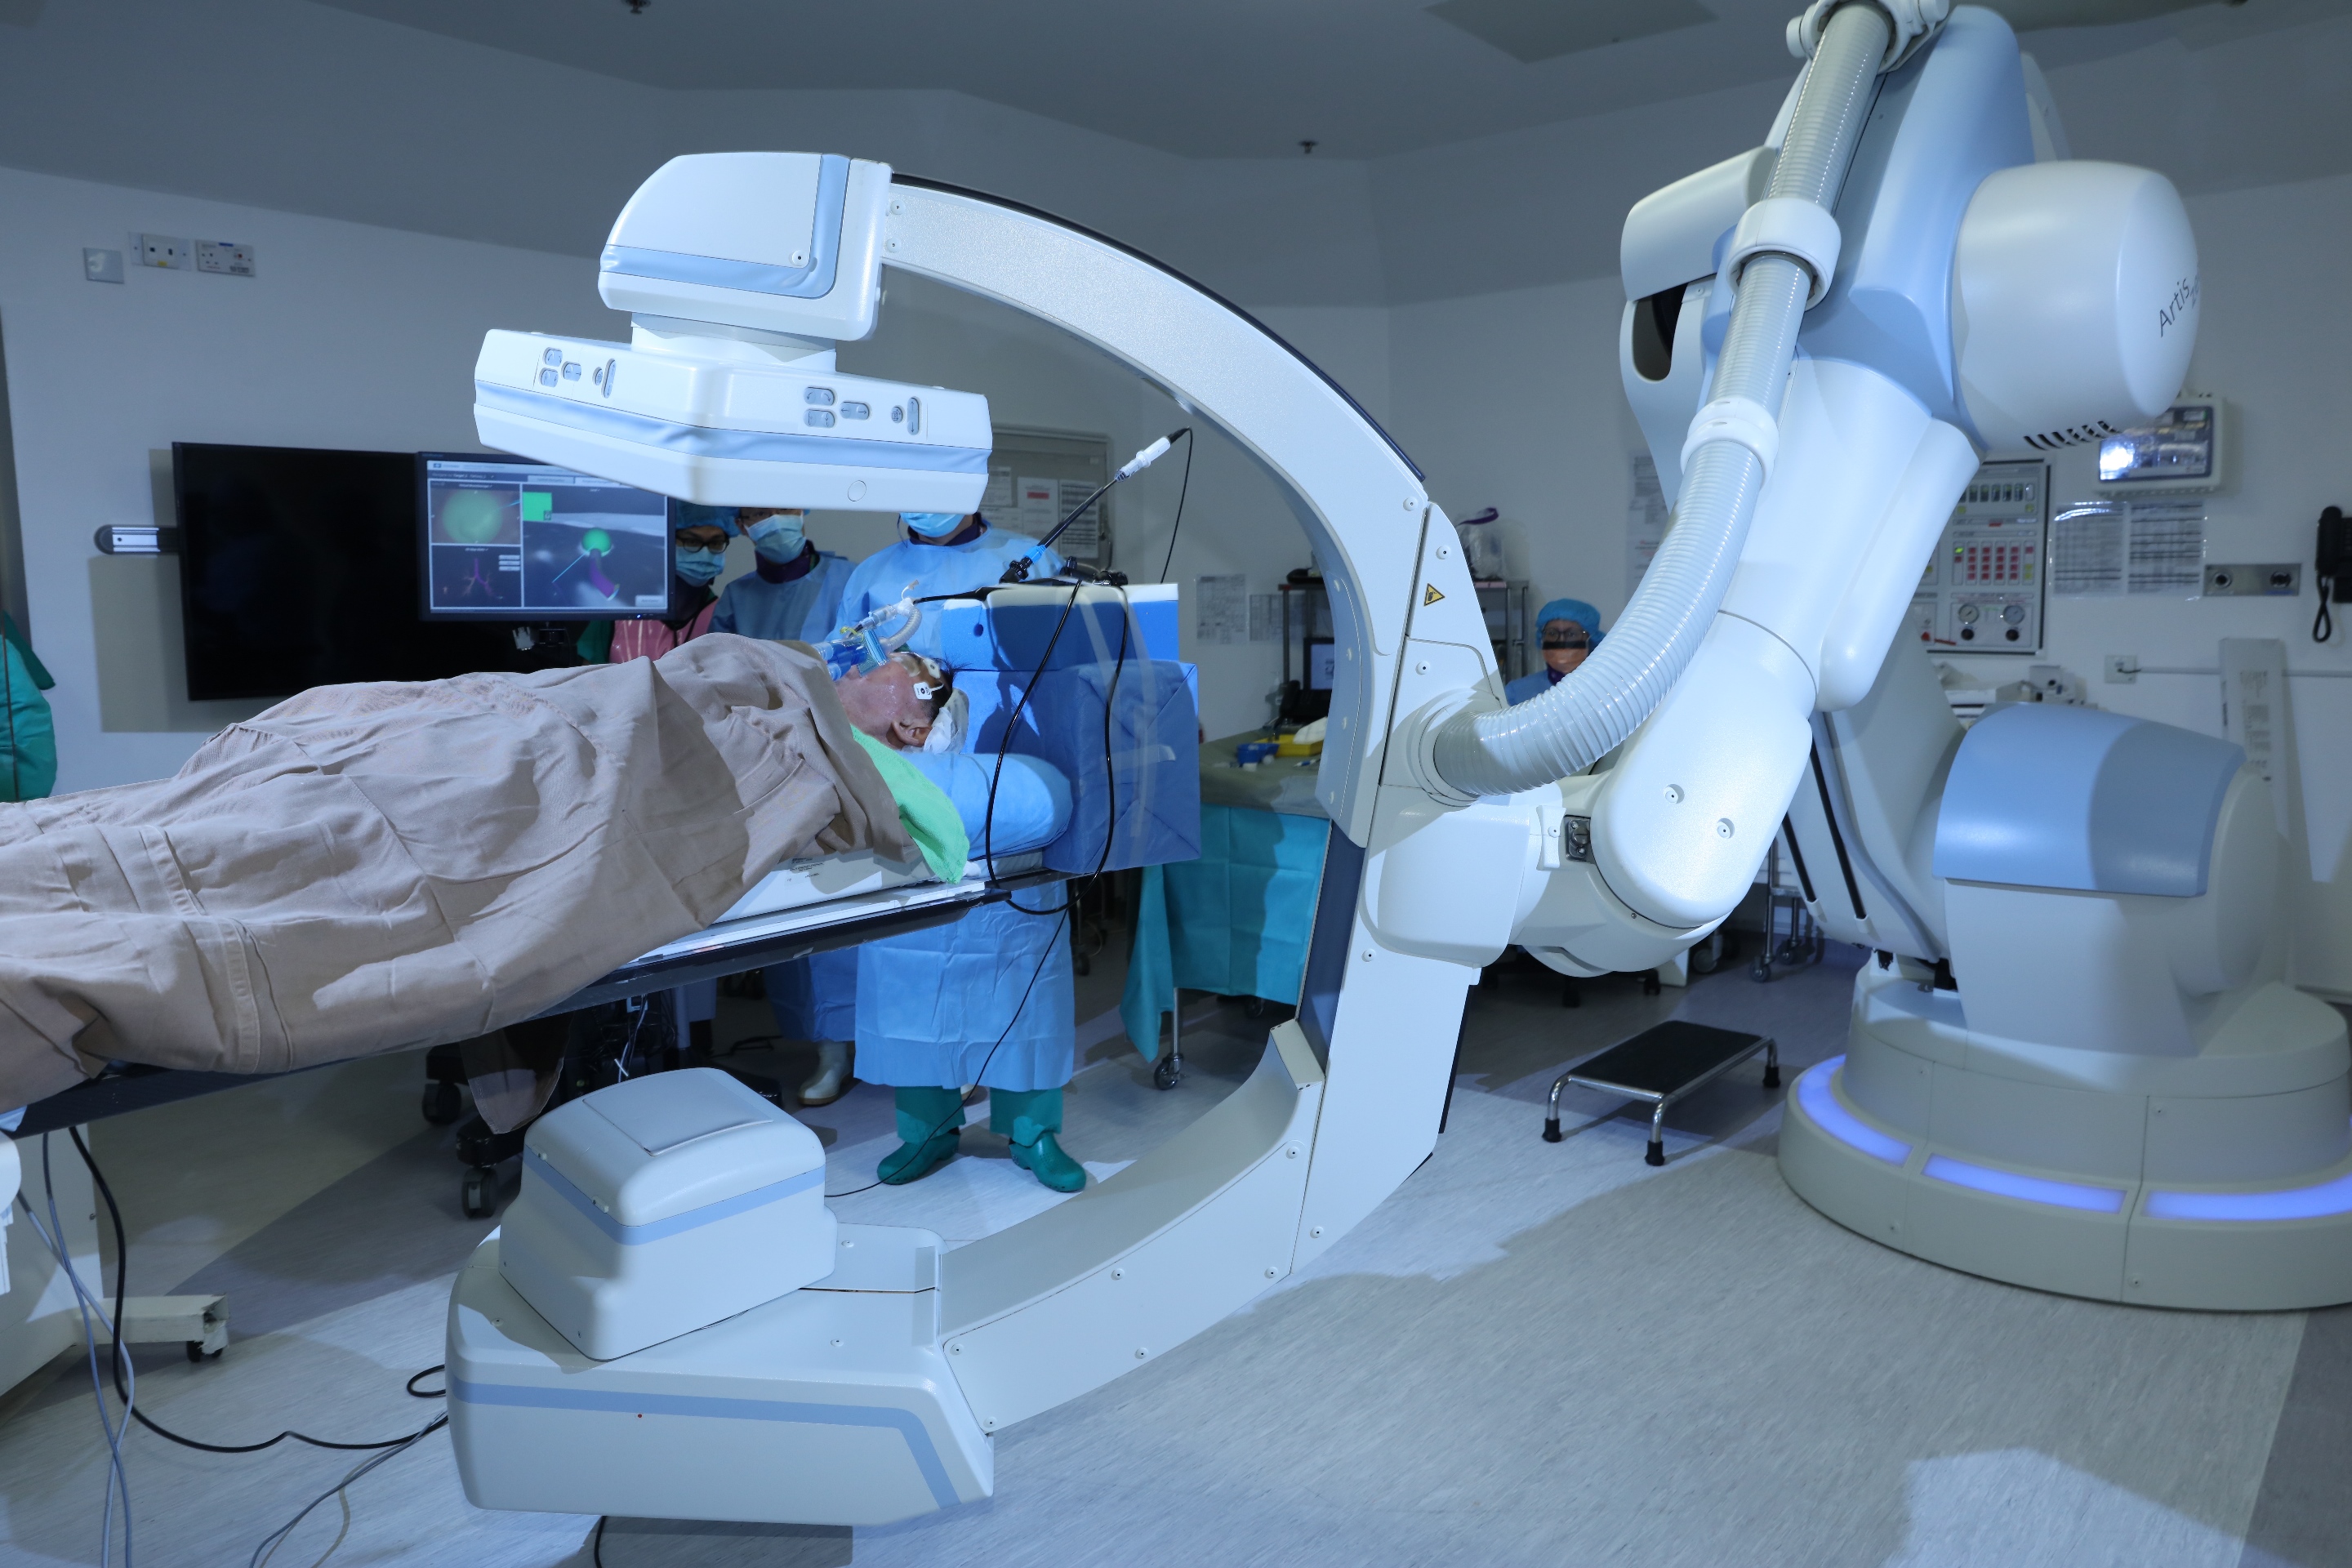 The actual scene showing the combined use of Electromagnetic Navigation Bronchoscopy (ENB) with Hybrid Operating Room